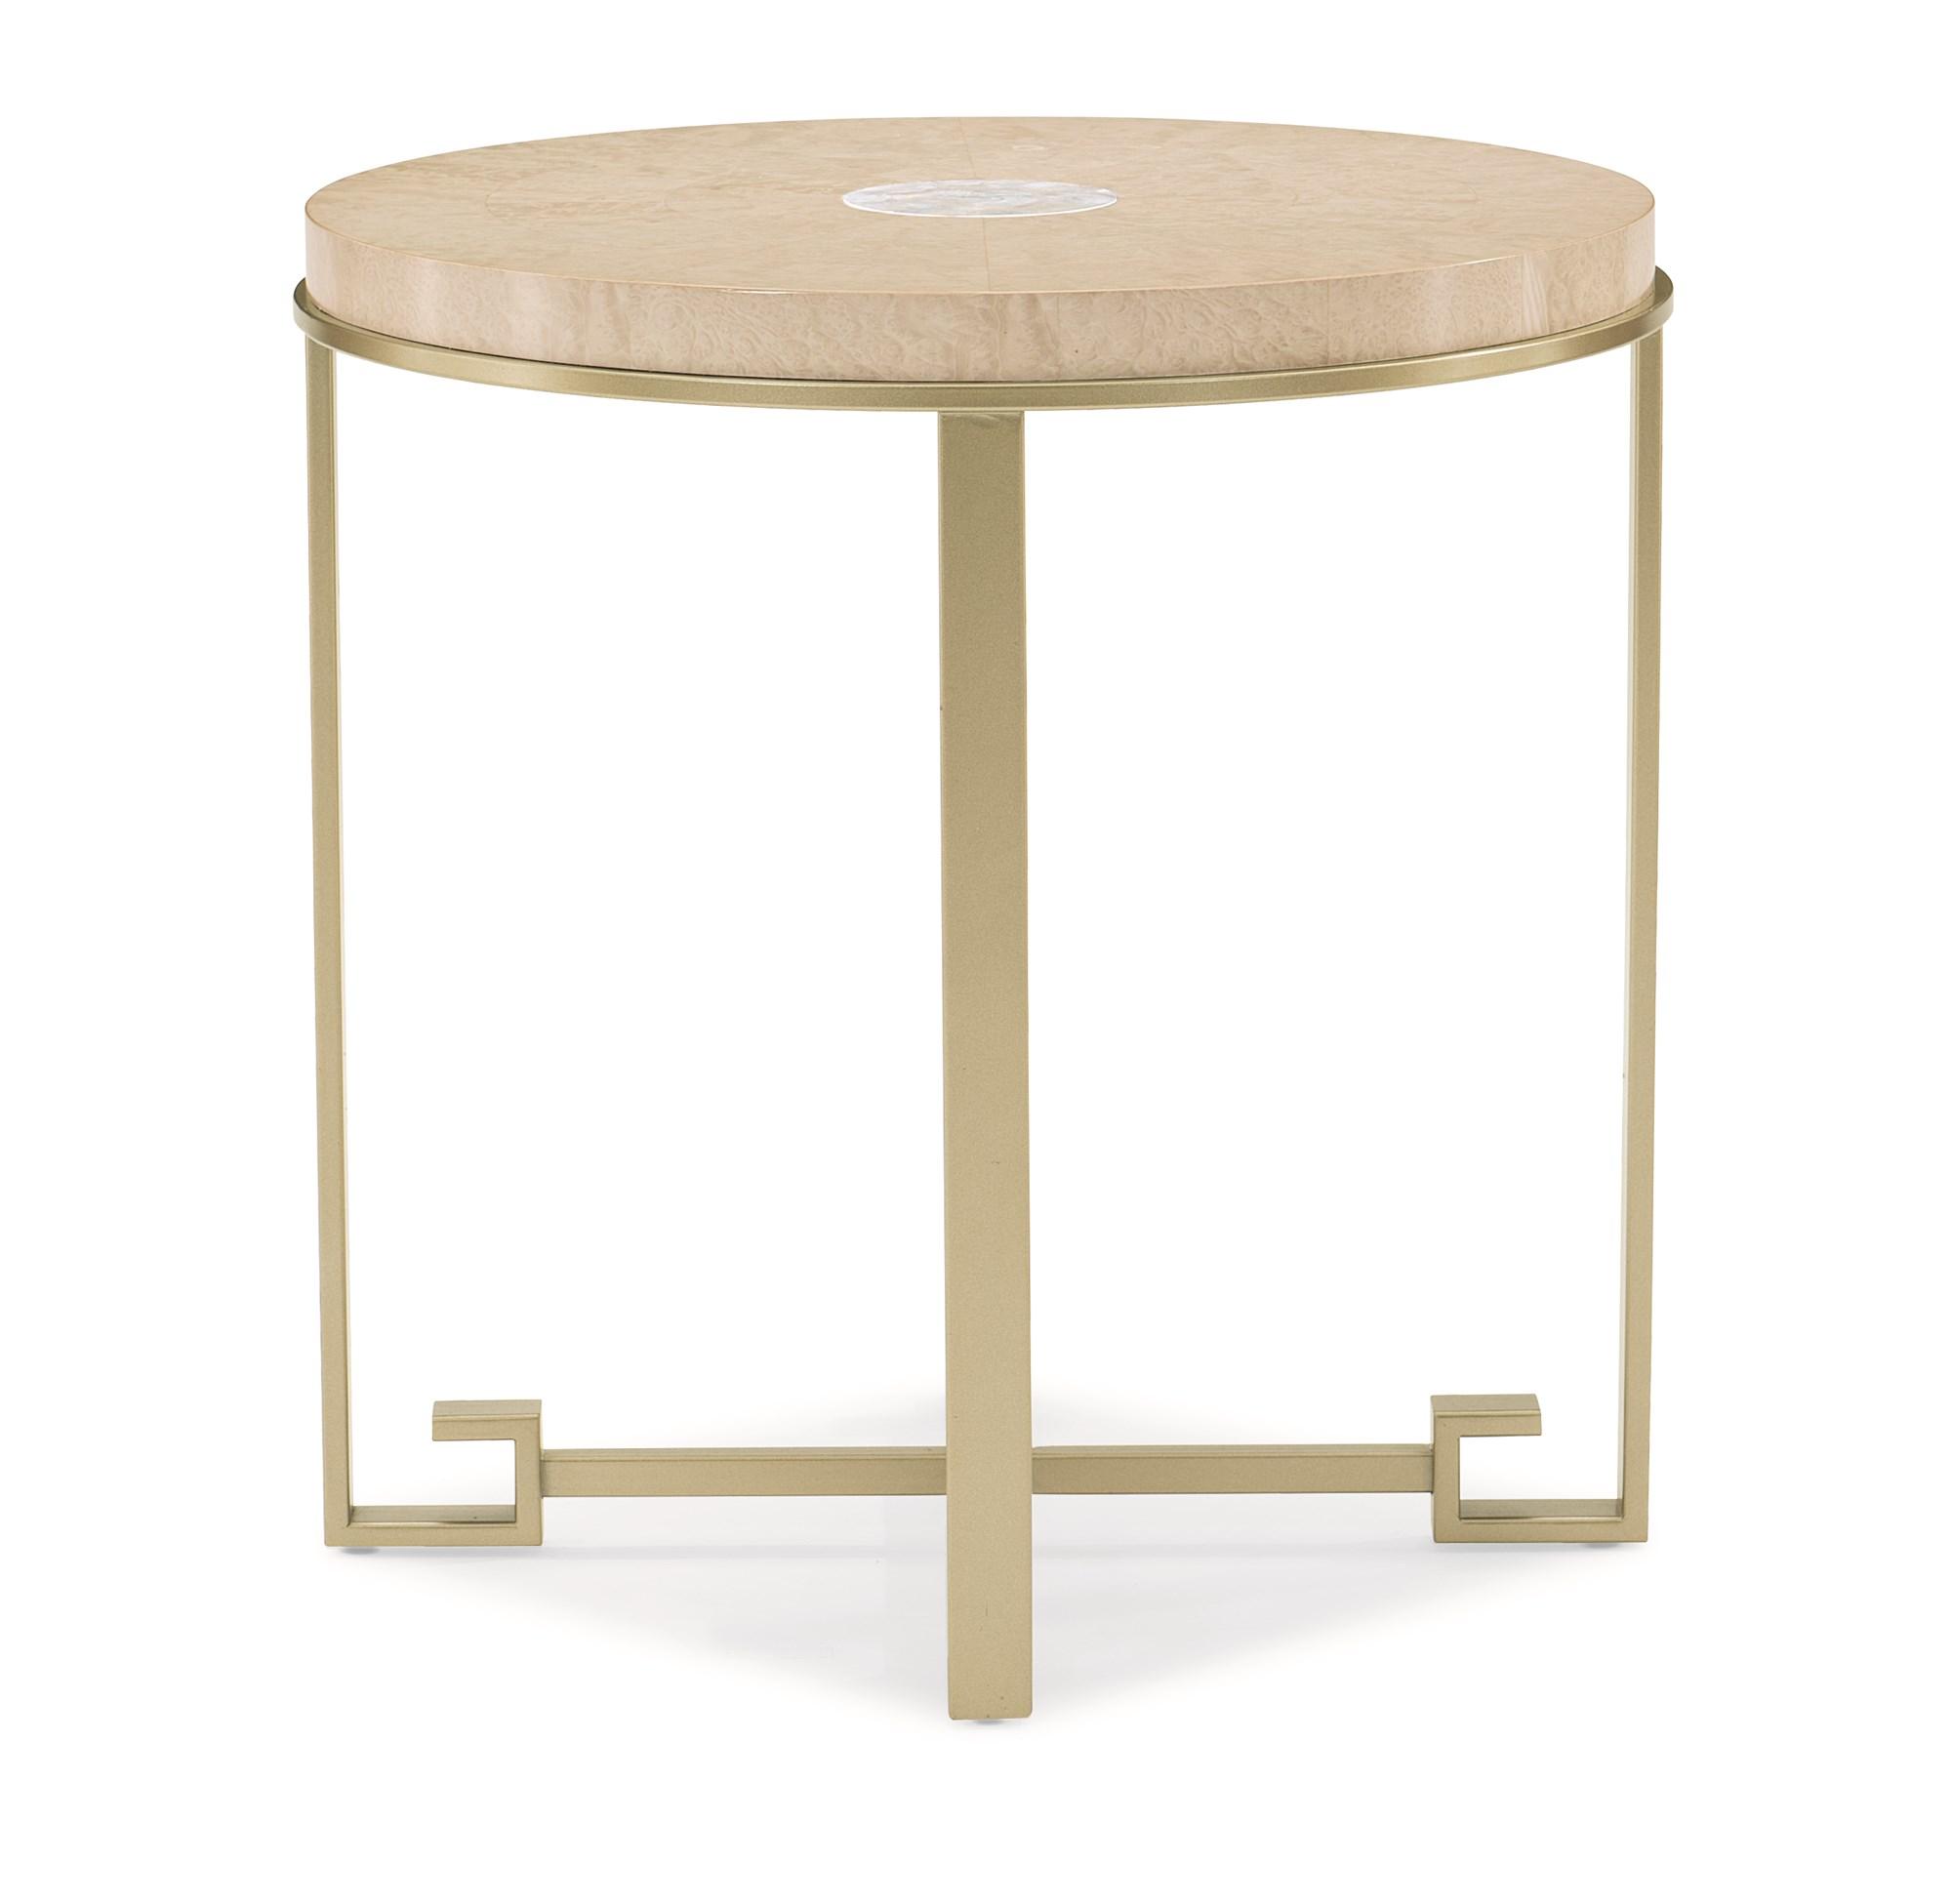 Contemporary End Table SHELL EYE? CLA-418-4213 in Blondie, Champagne 